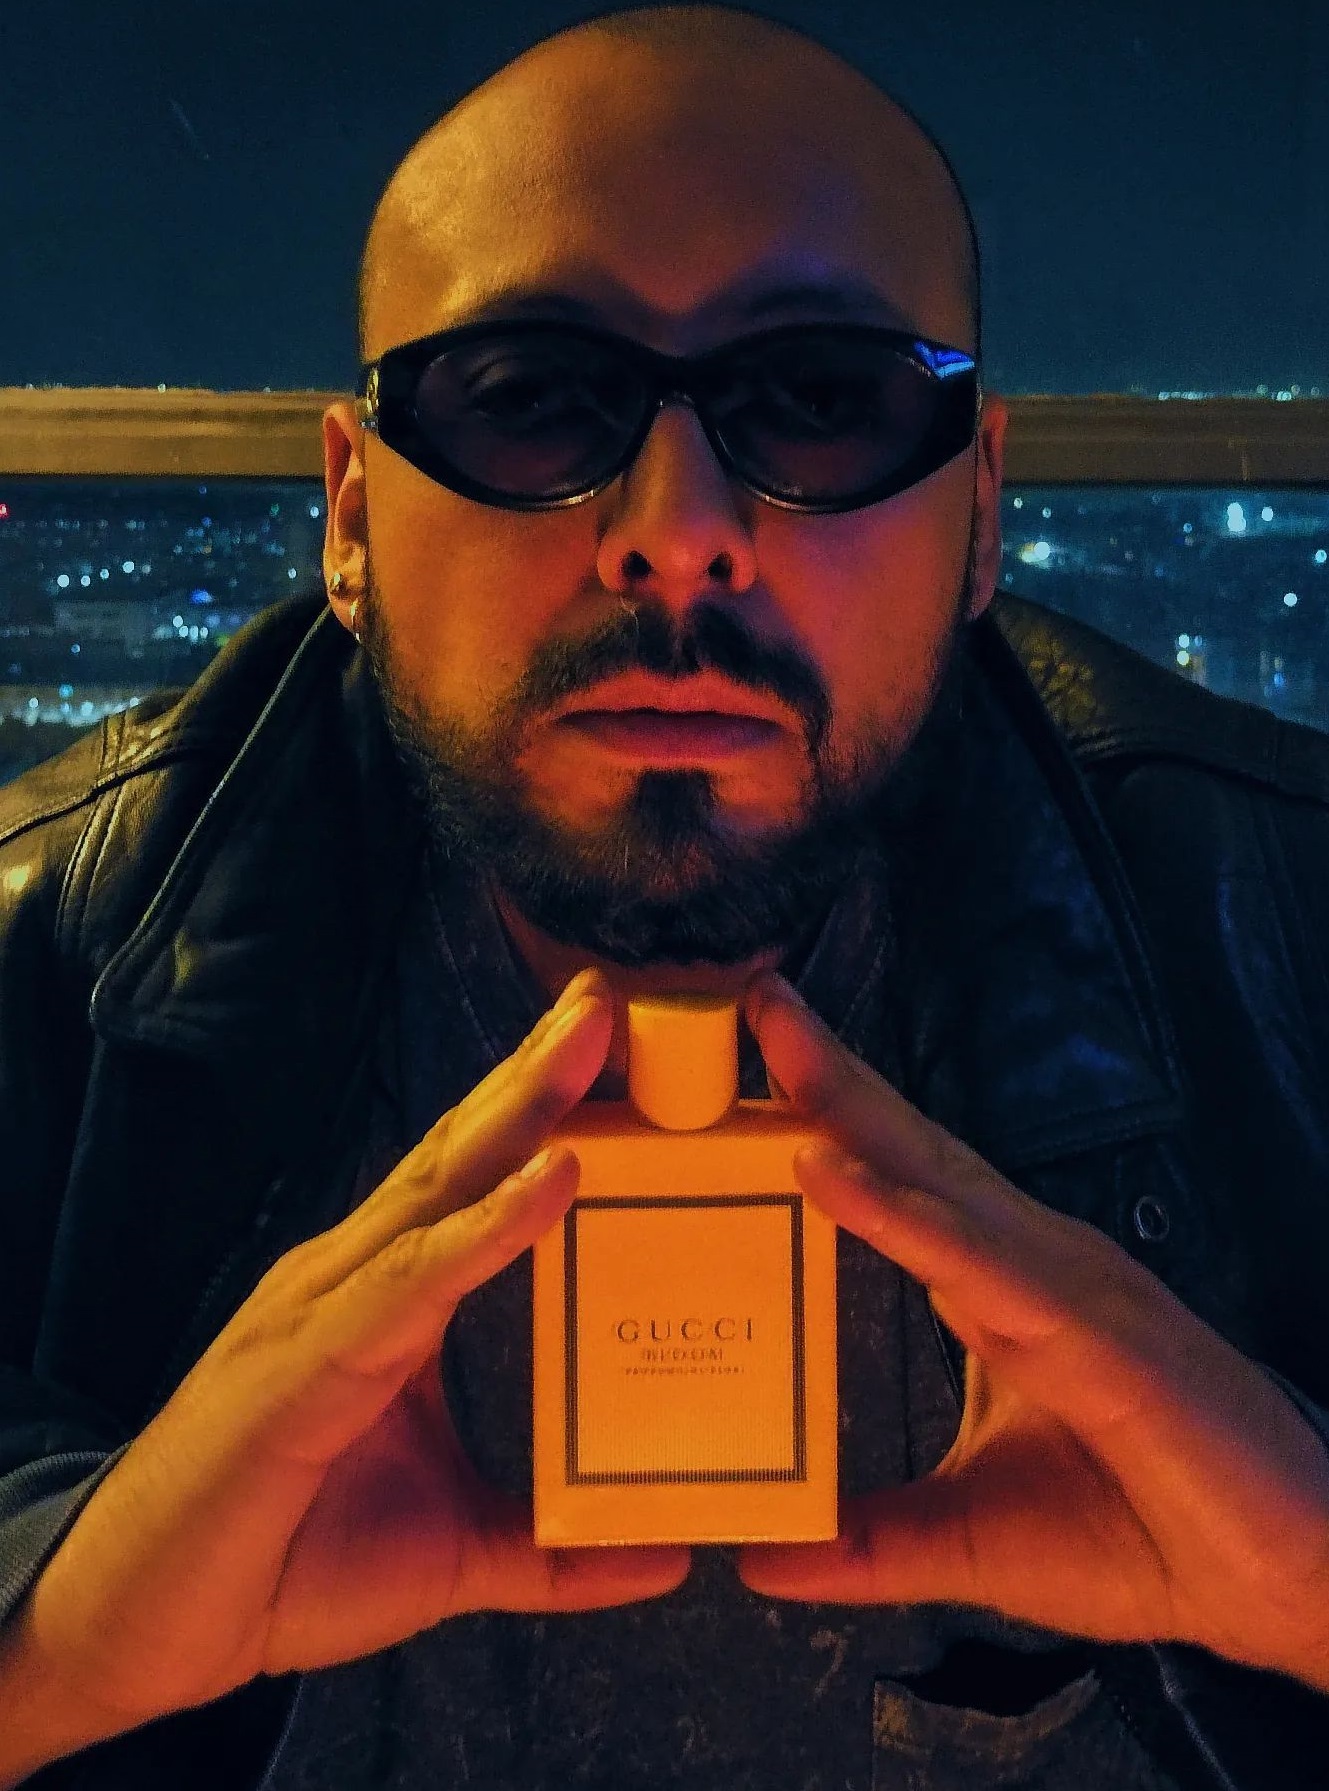 Gucci perfume being a must-have product to own, a man holding it, who is wearing shades